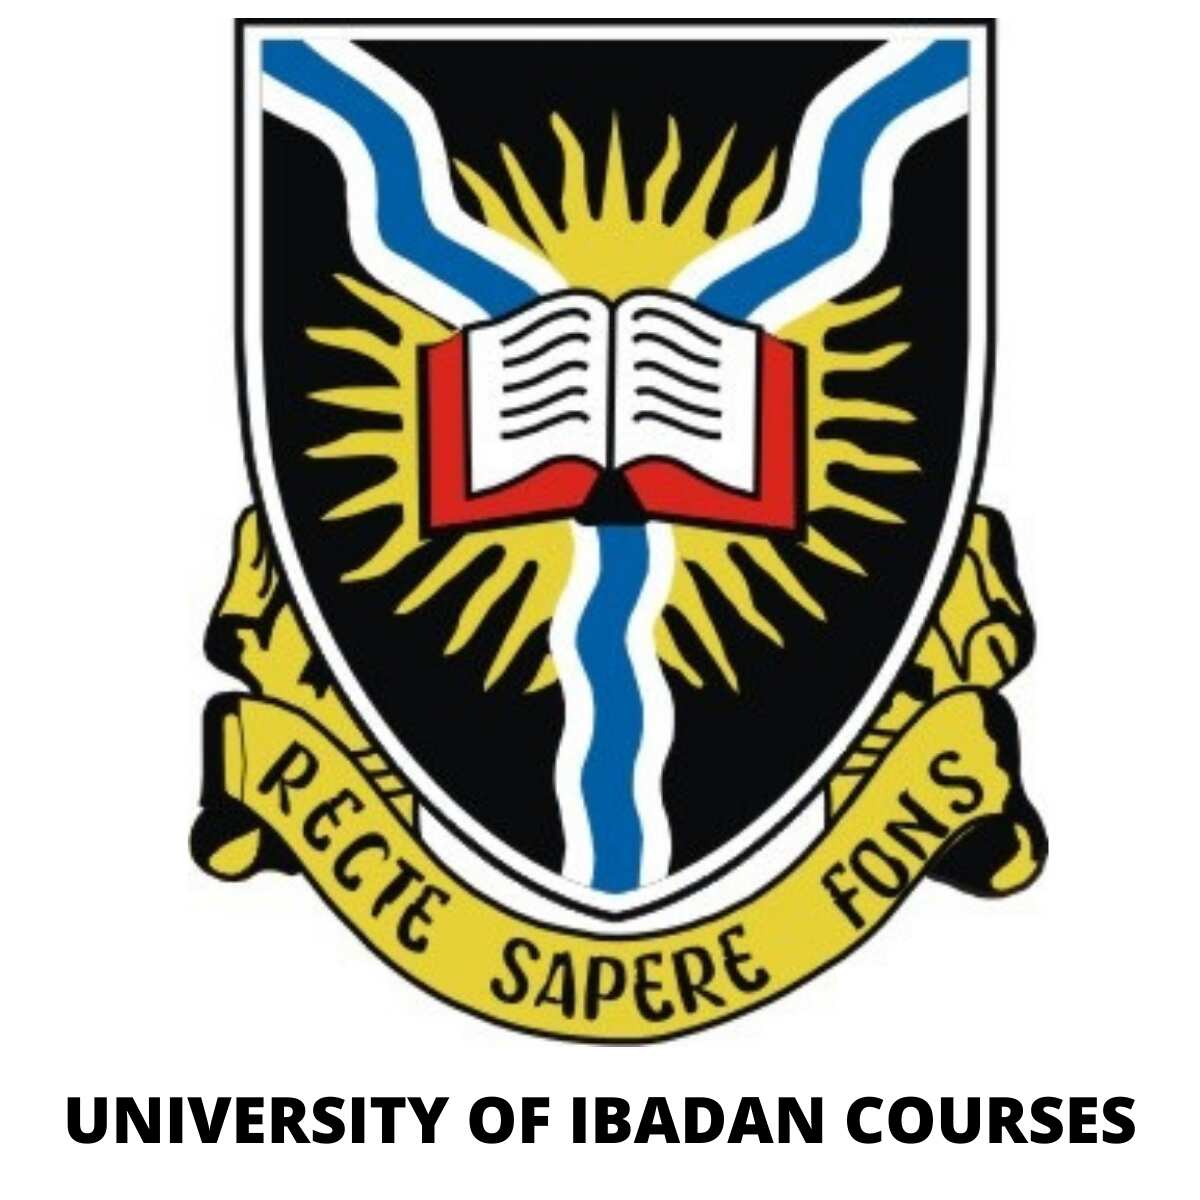 University of Ibadan courses and their requirements in 2020/2021